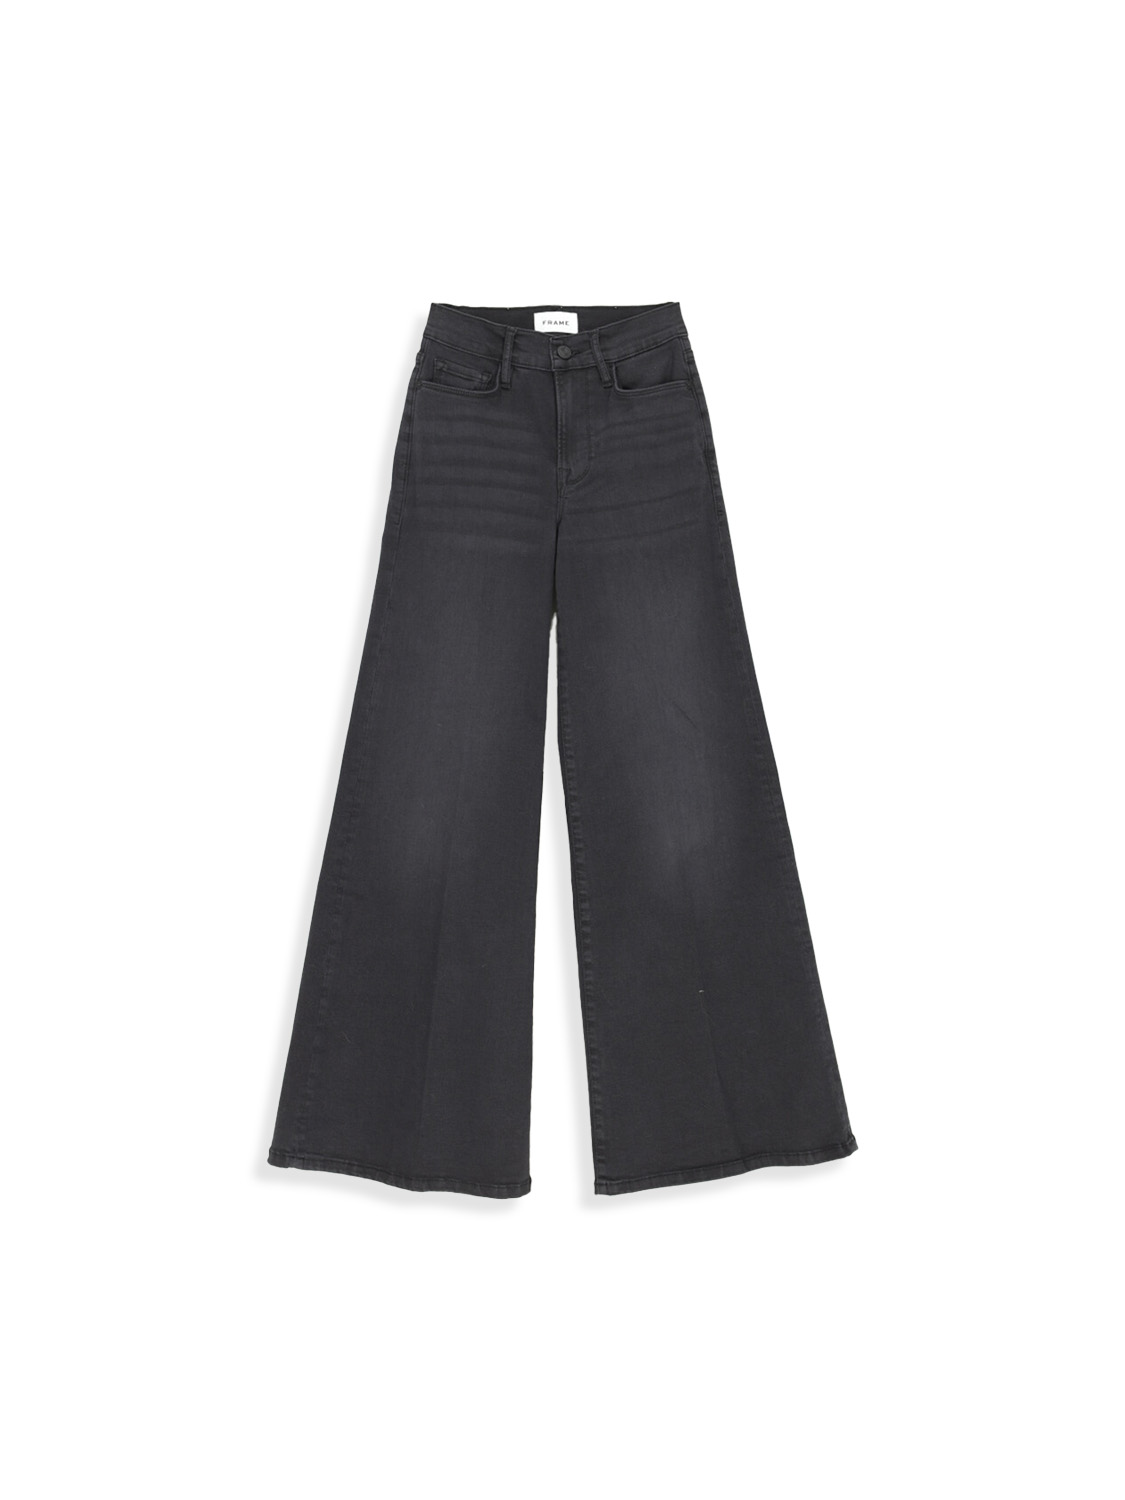 Le Pixie - Jeans trousers with crease